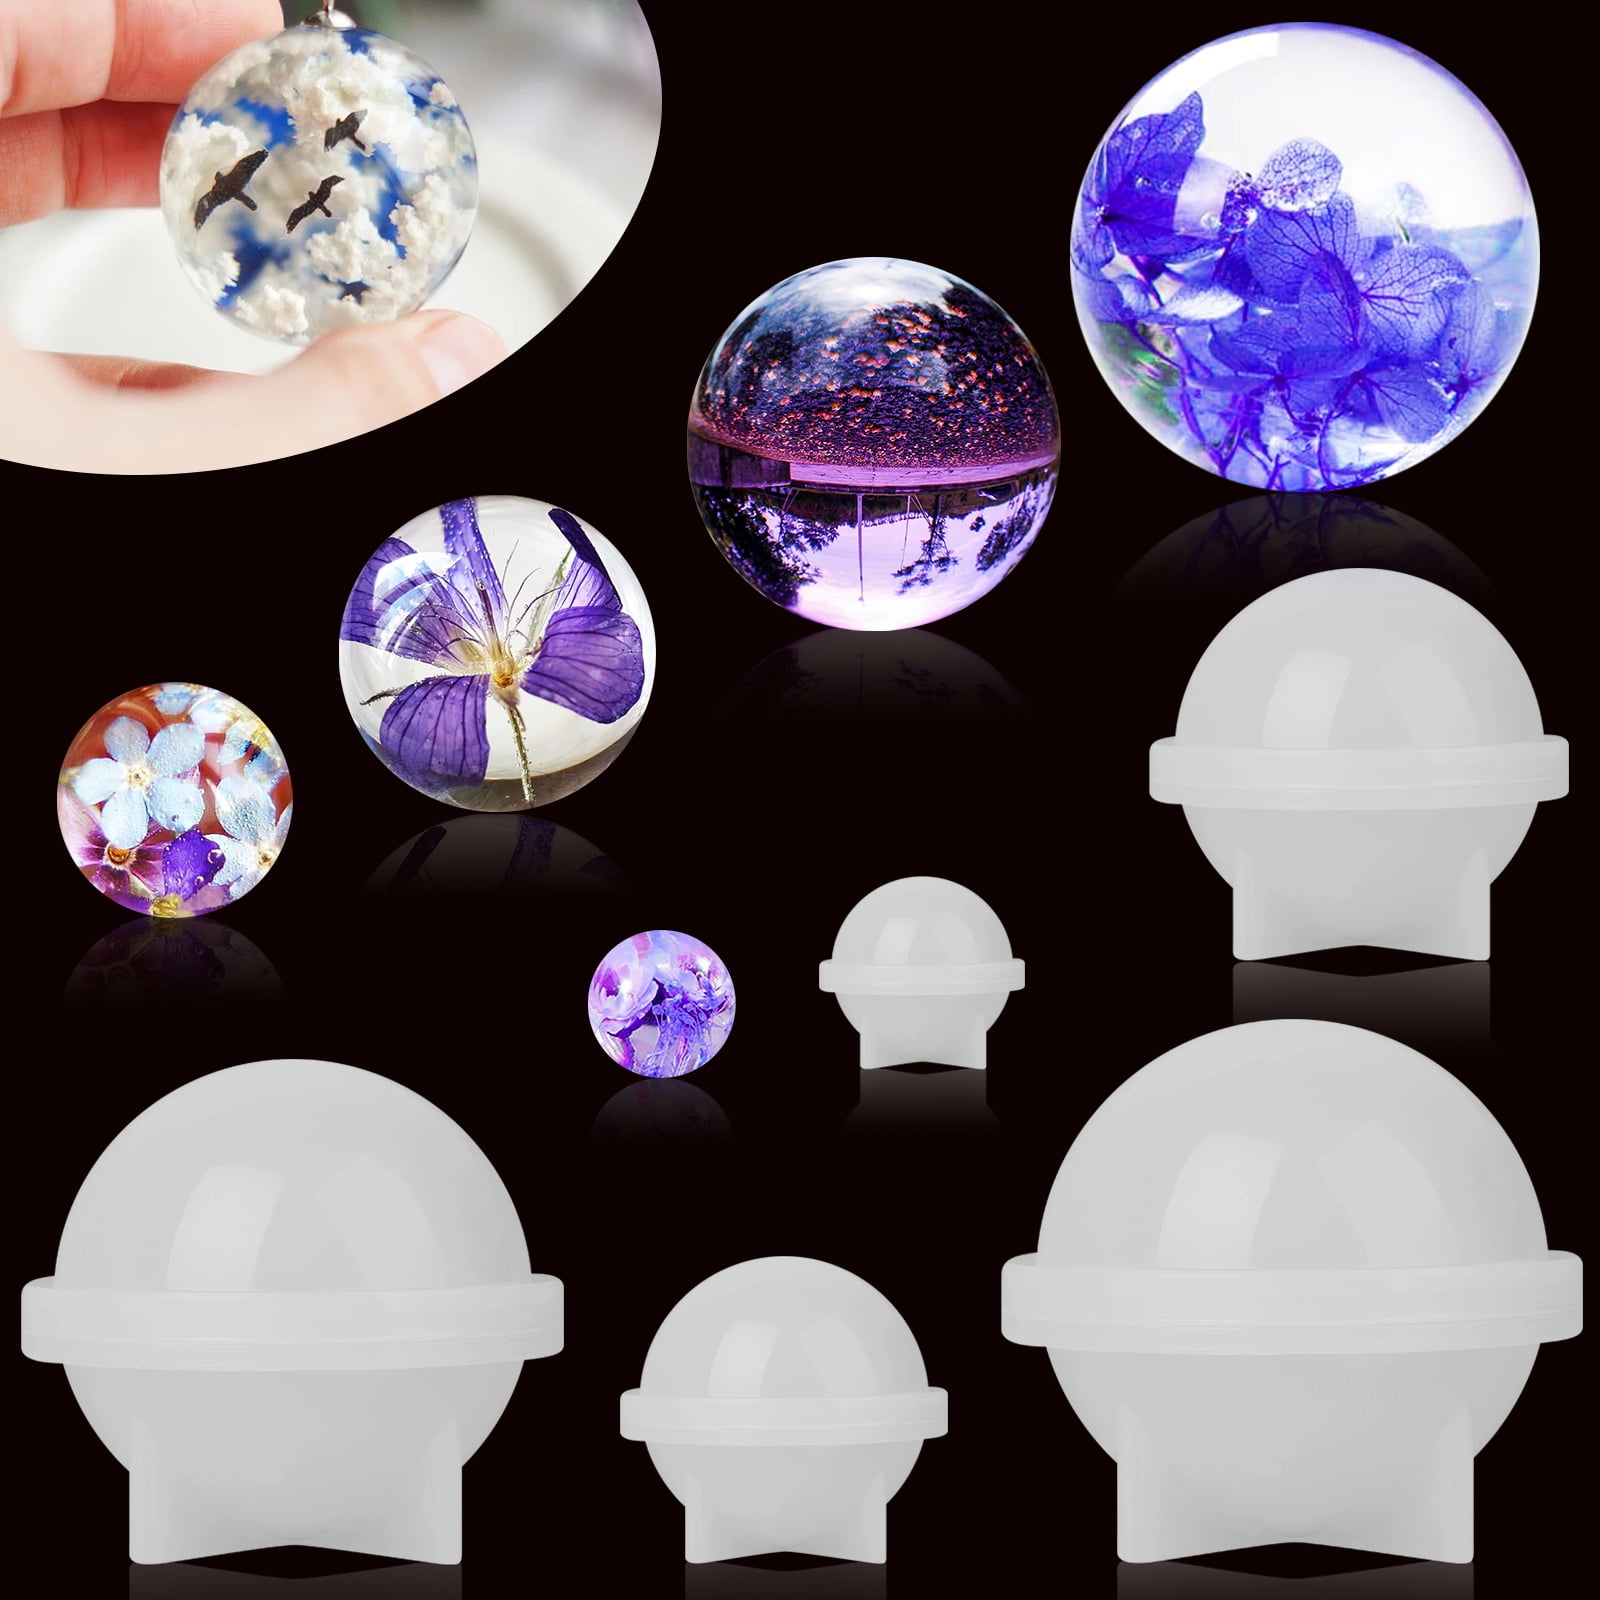 Candle　Bath　5pcs　Molds,　Molds　Silicone　Sphere　Ball　DIY,　for　Soap,　Jewelry　Resin　Sizes　TSV　Making,　Resin　Round　Epoxy　with　Homemade　Bomb